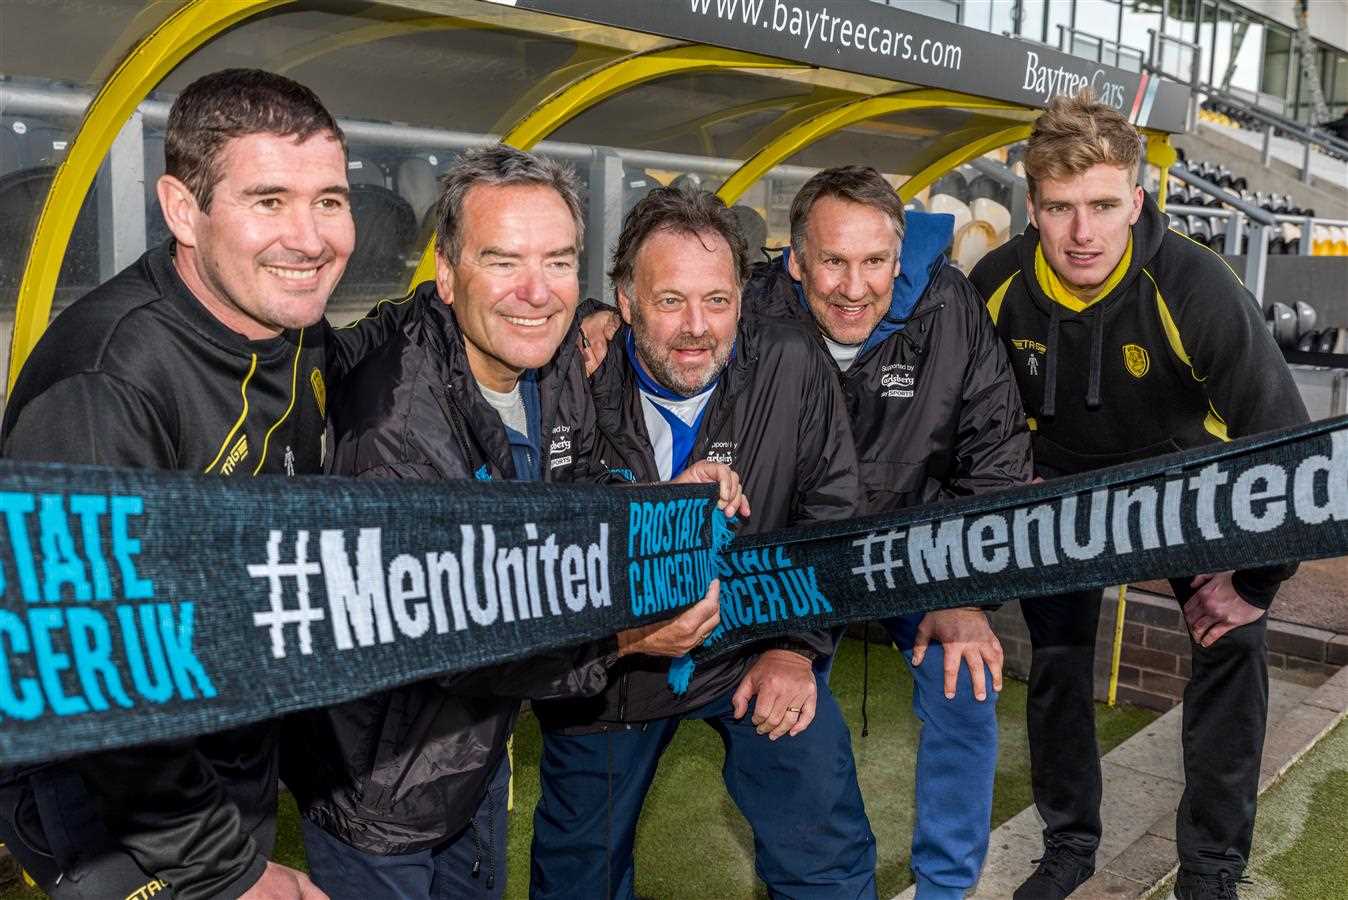 Join Jeff Stelling on his March for Men - News - Cheltenham Town FC